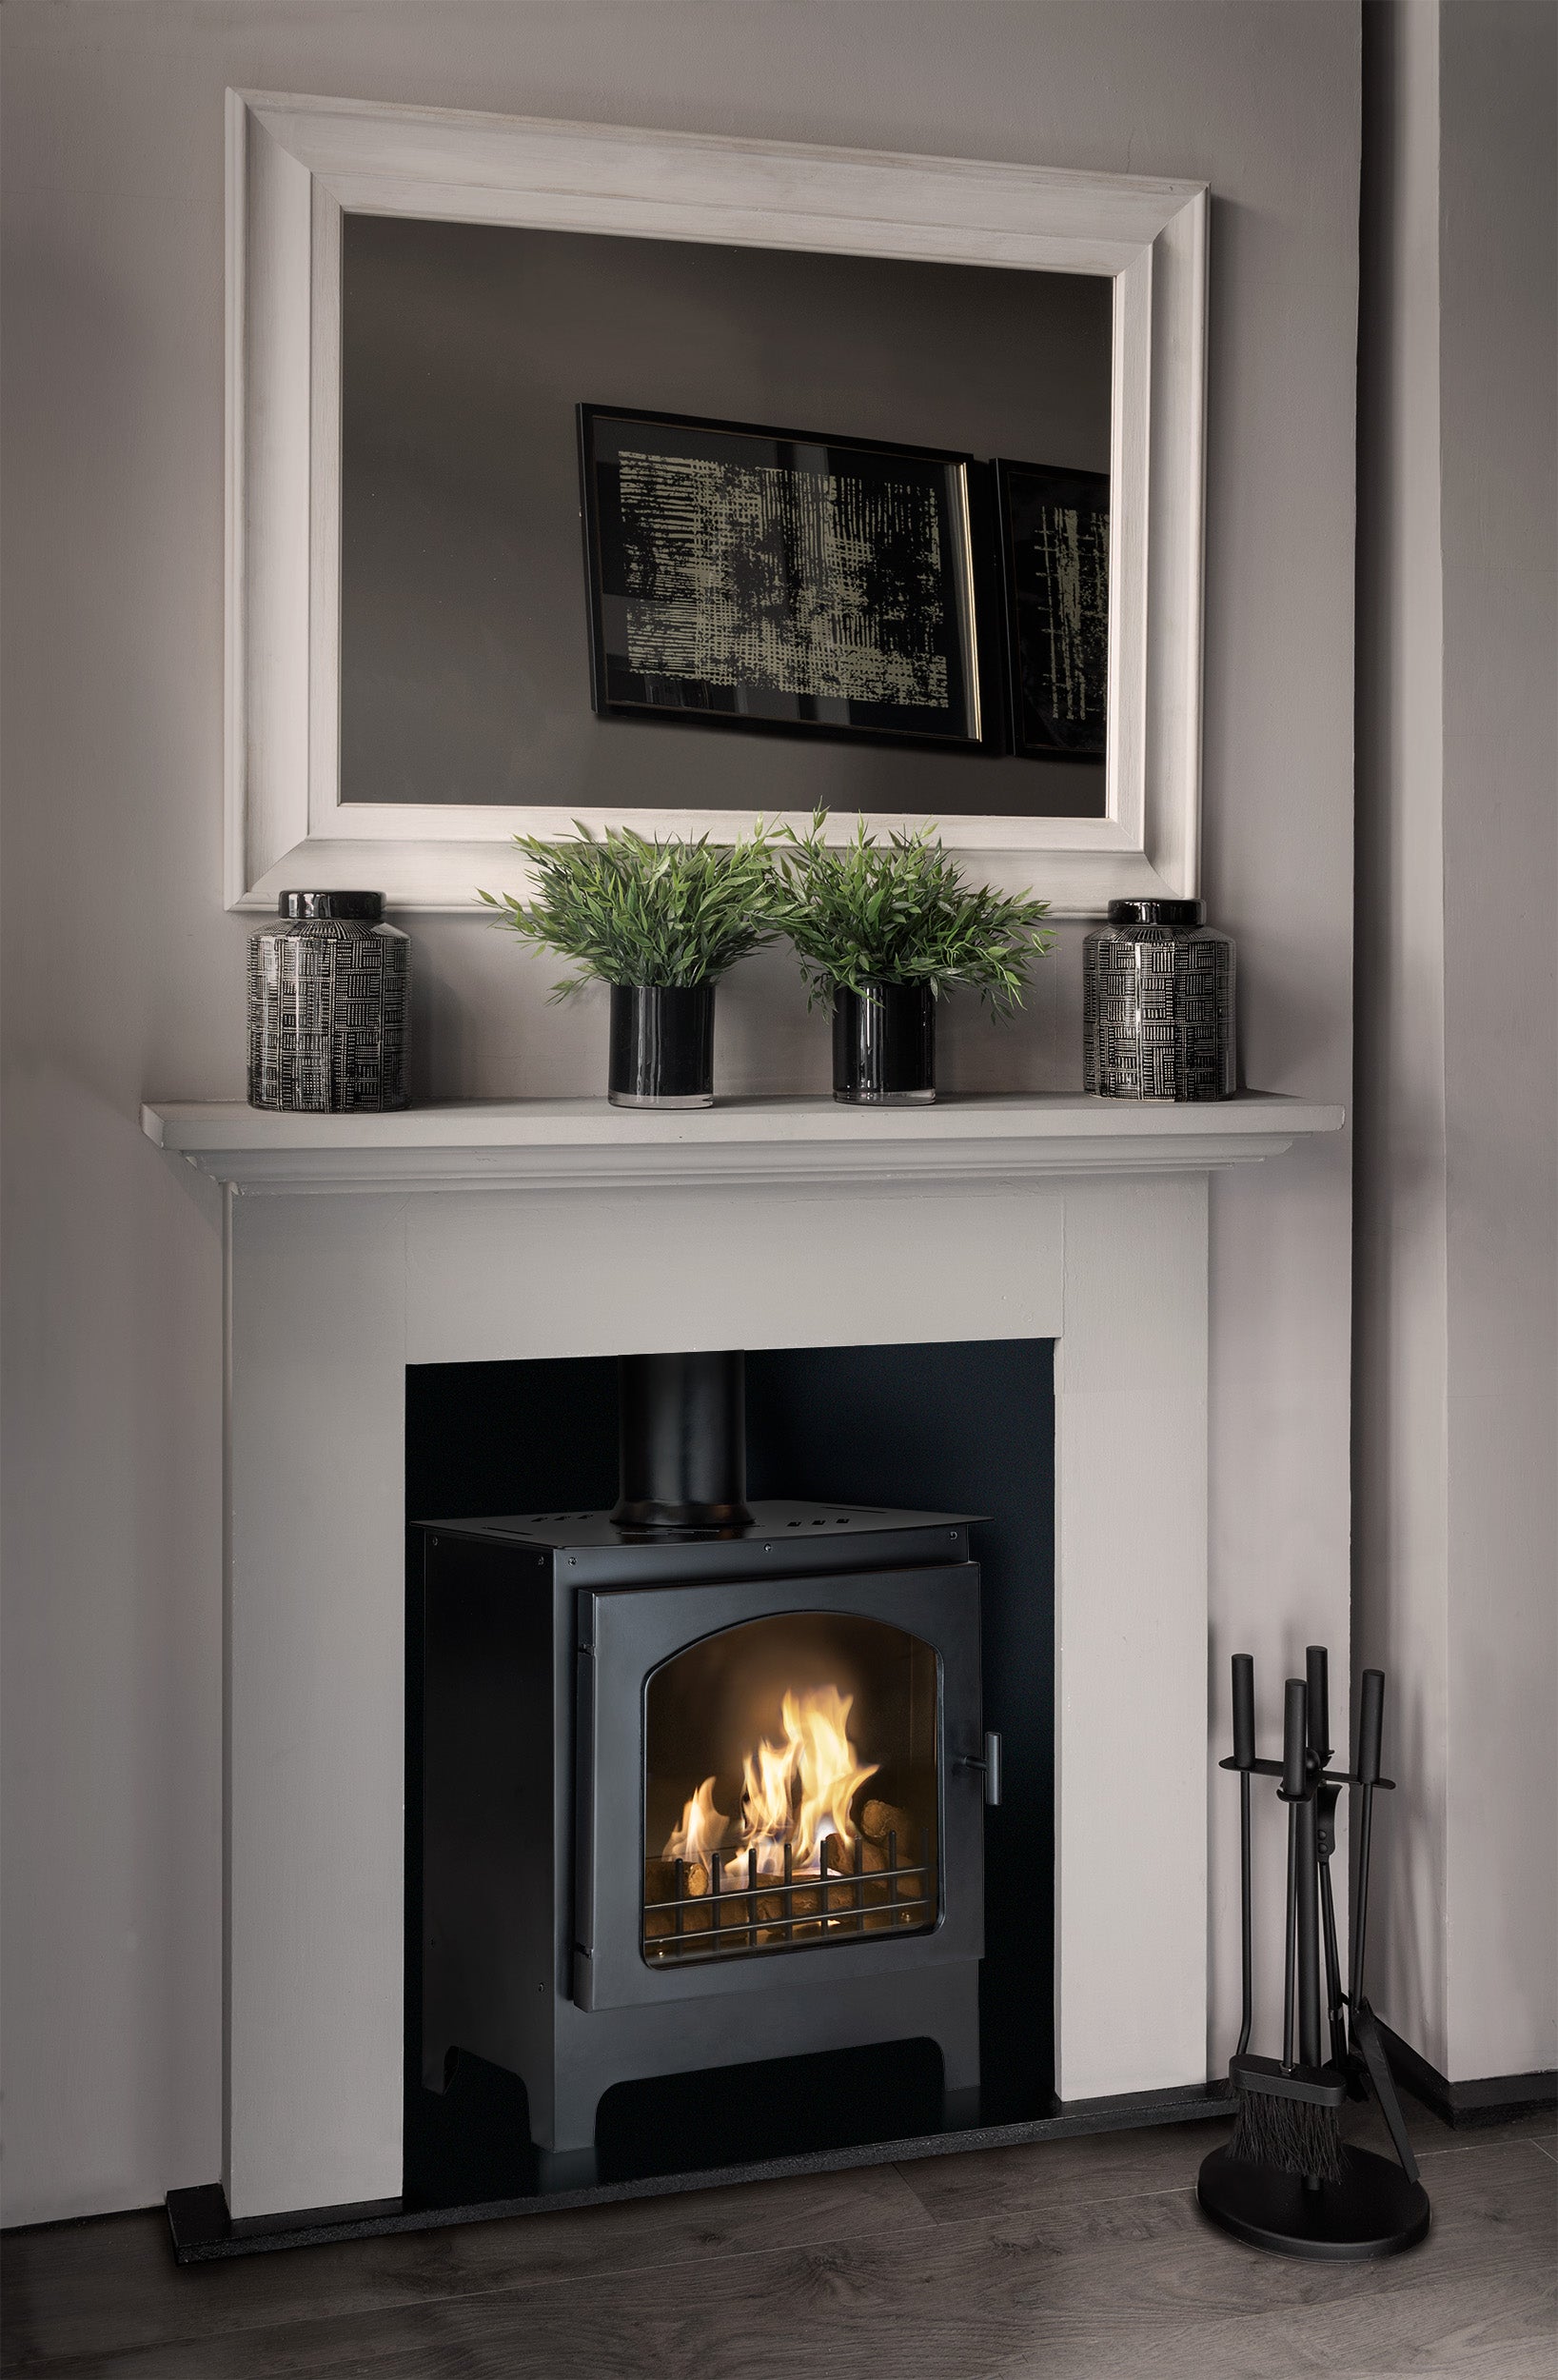 MULBERRY Black Bioethanol Stove with white mantelpiece